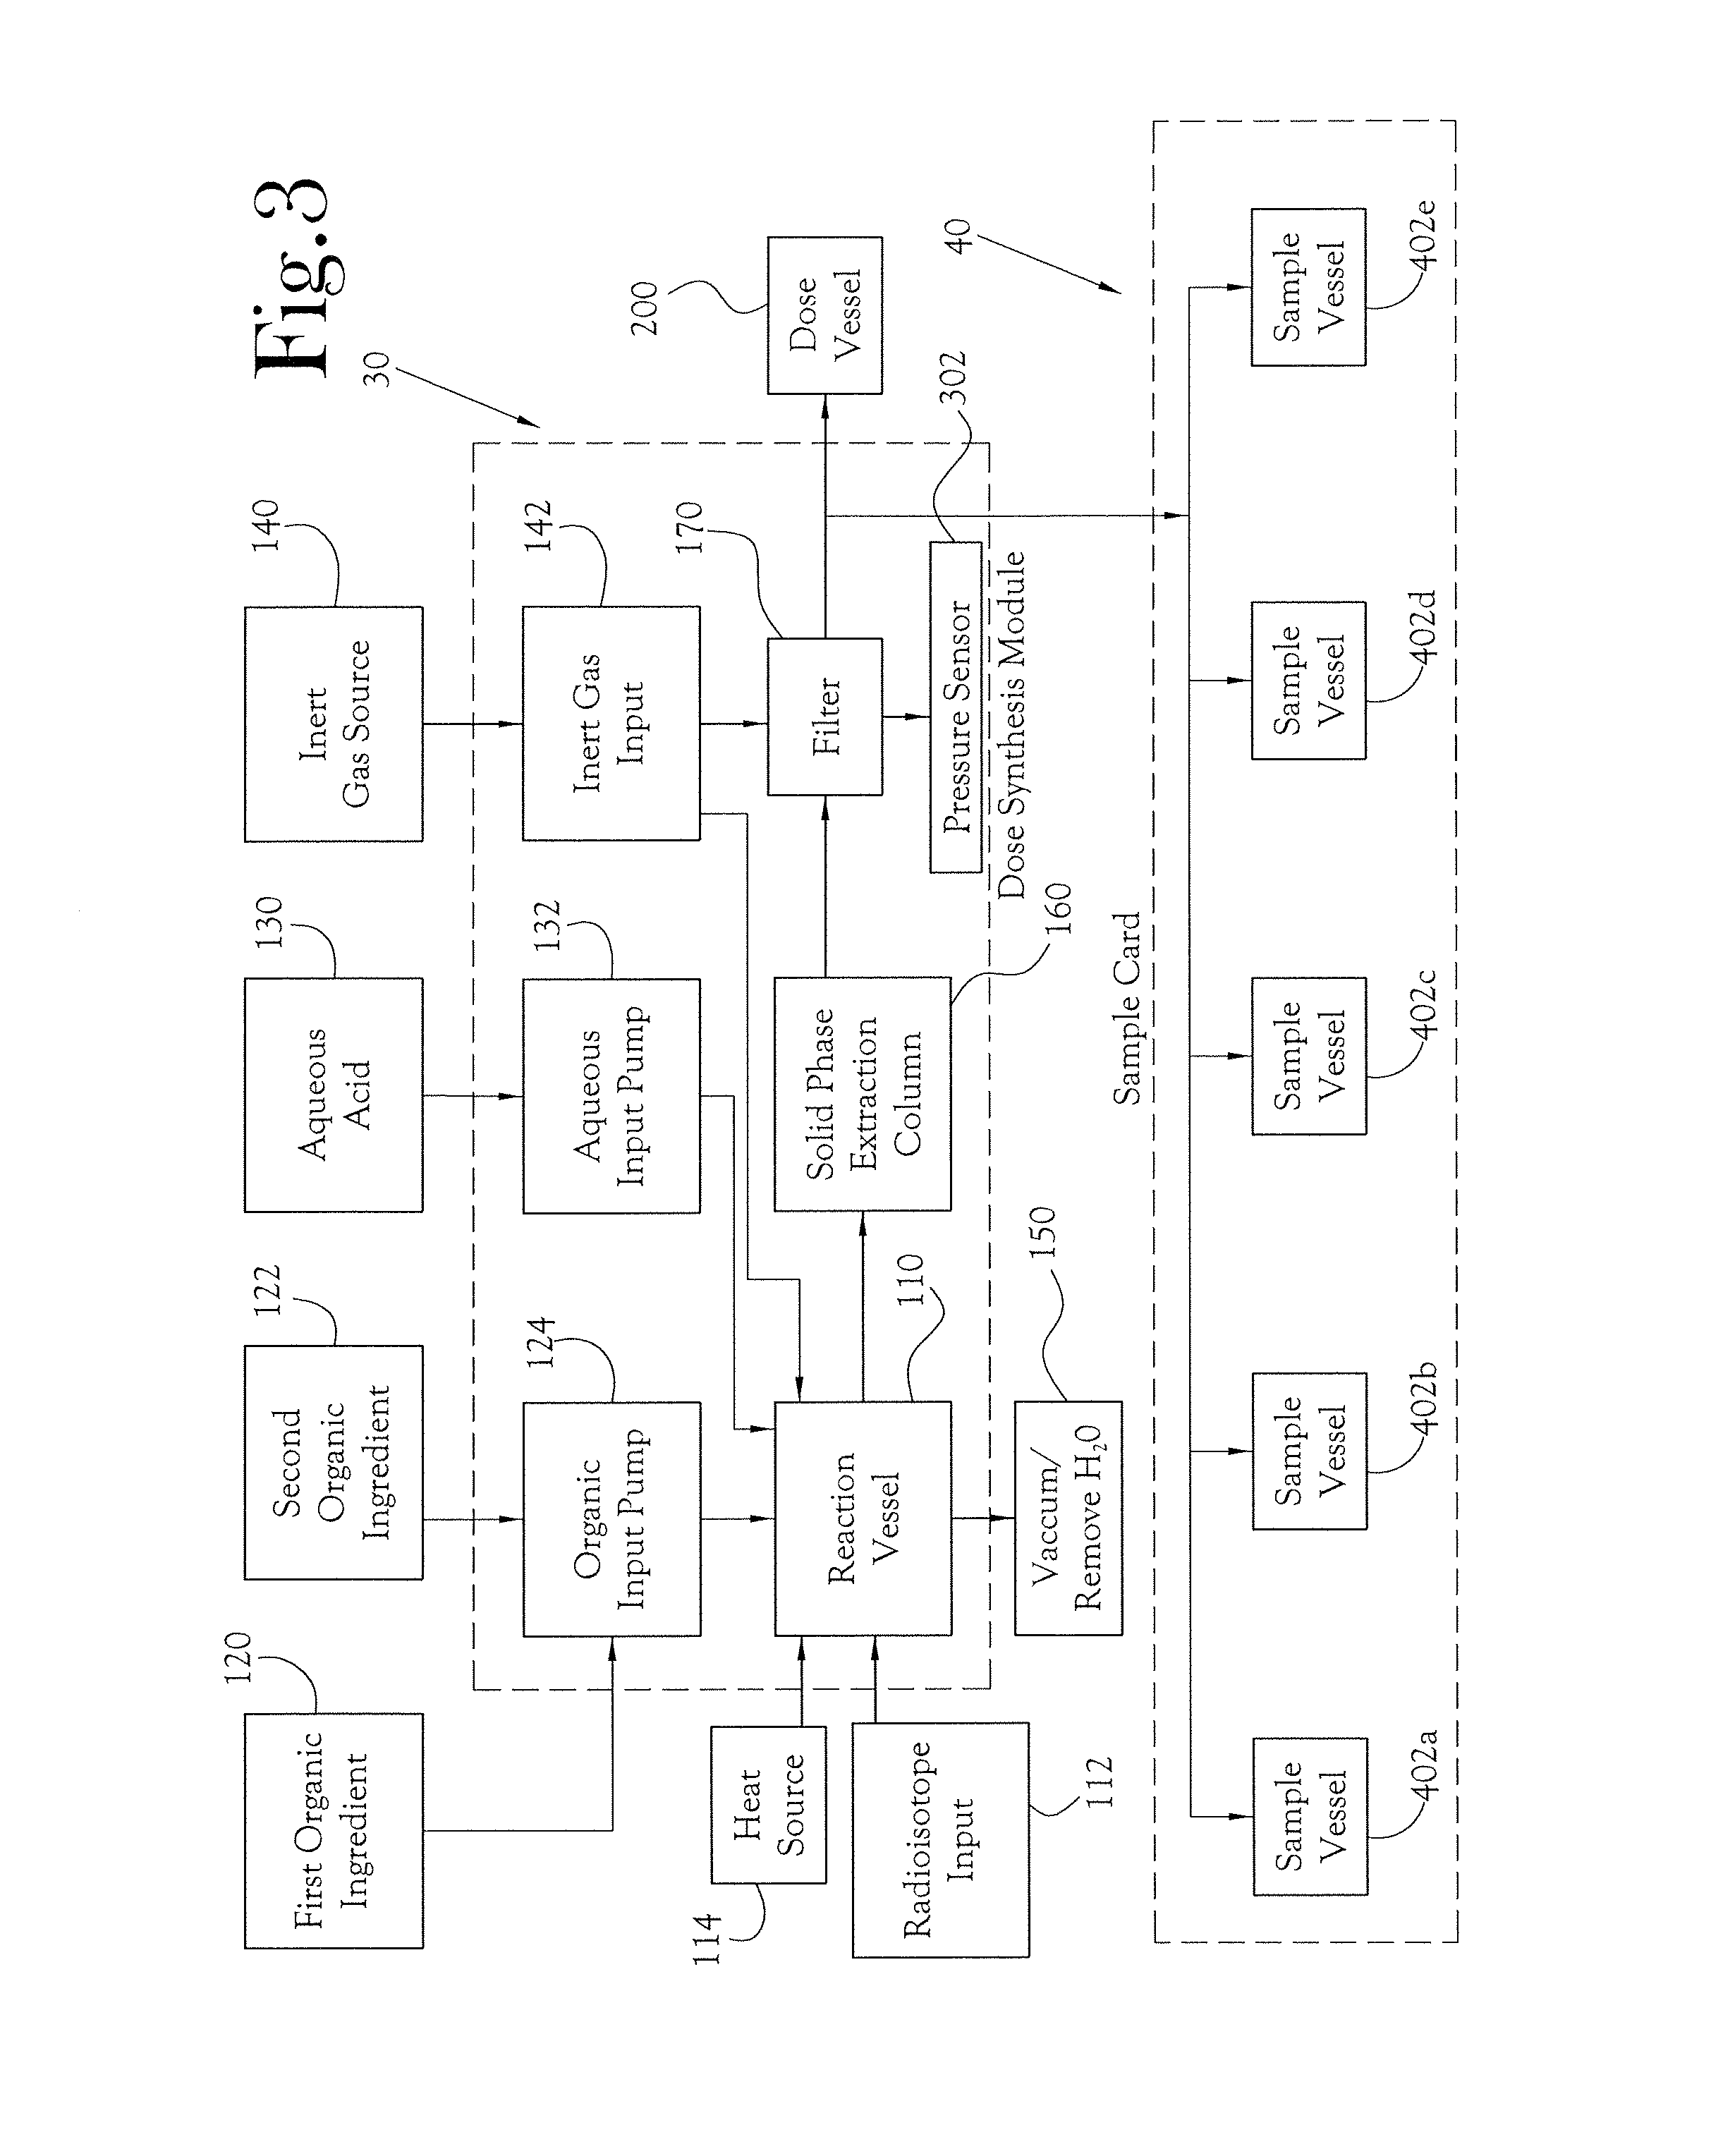 Dose synthesis module for biomarker generator system